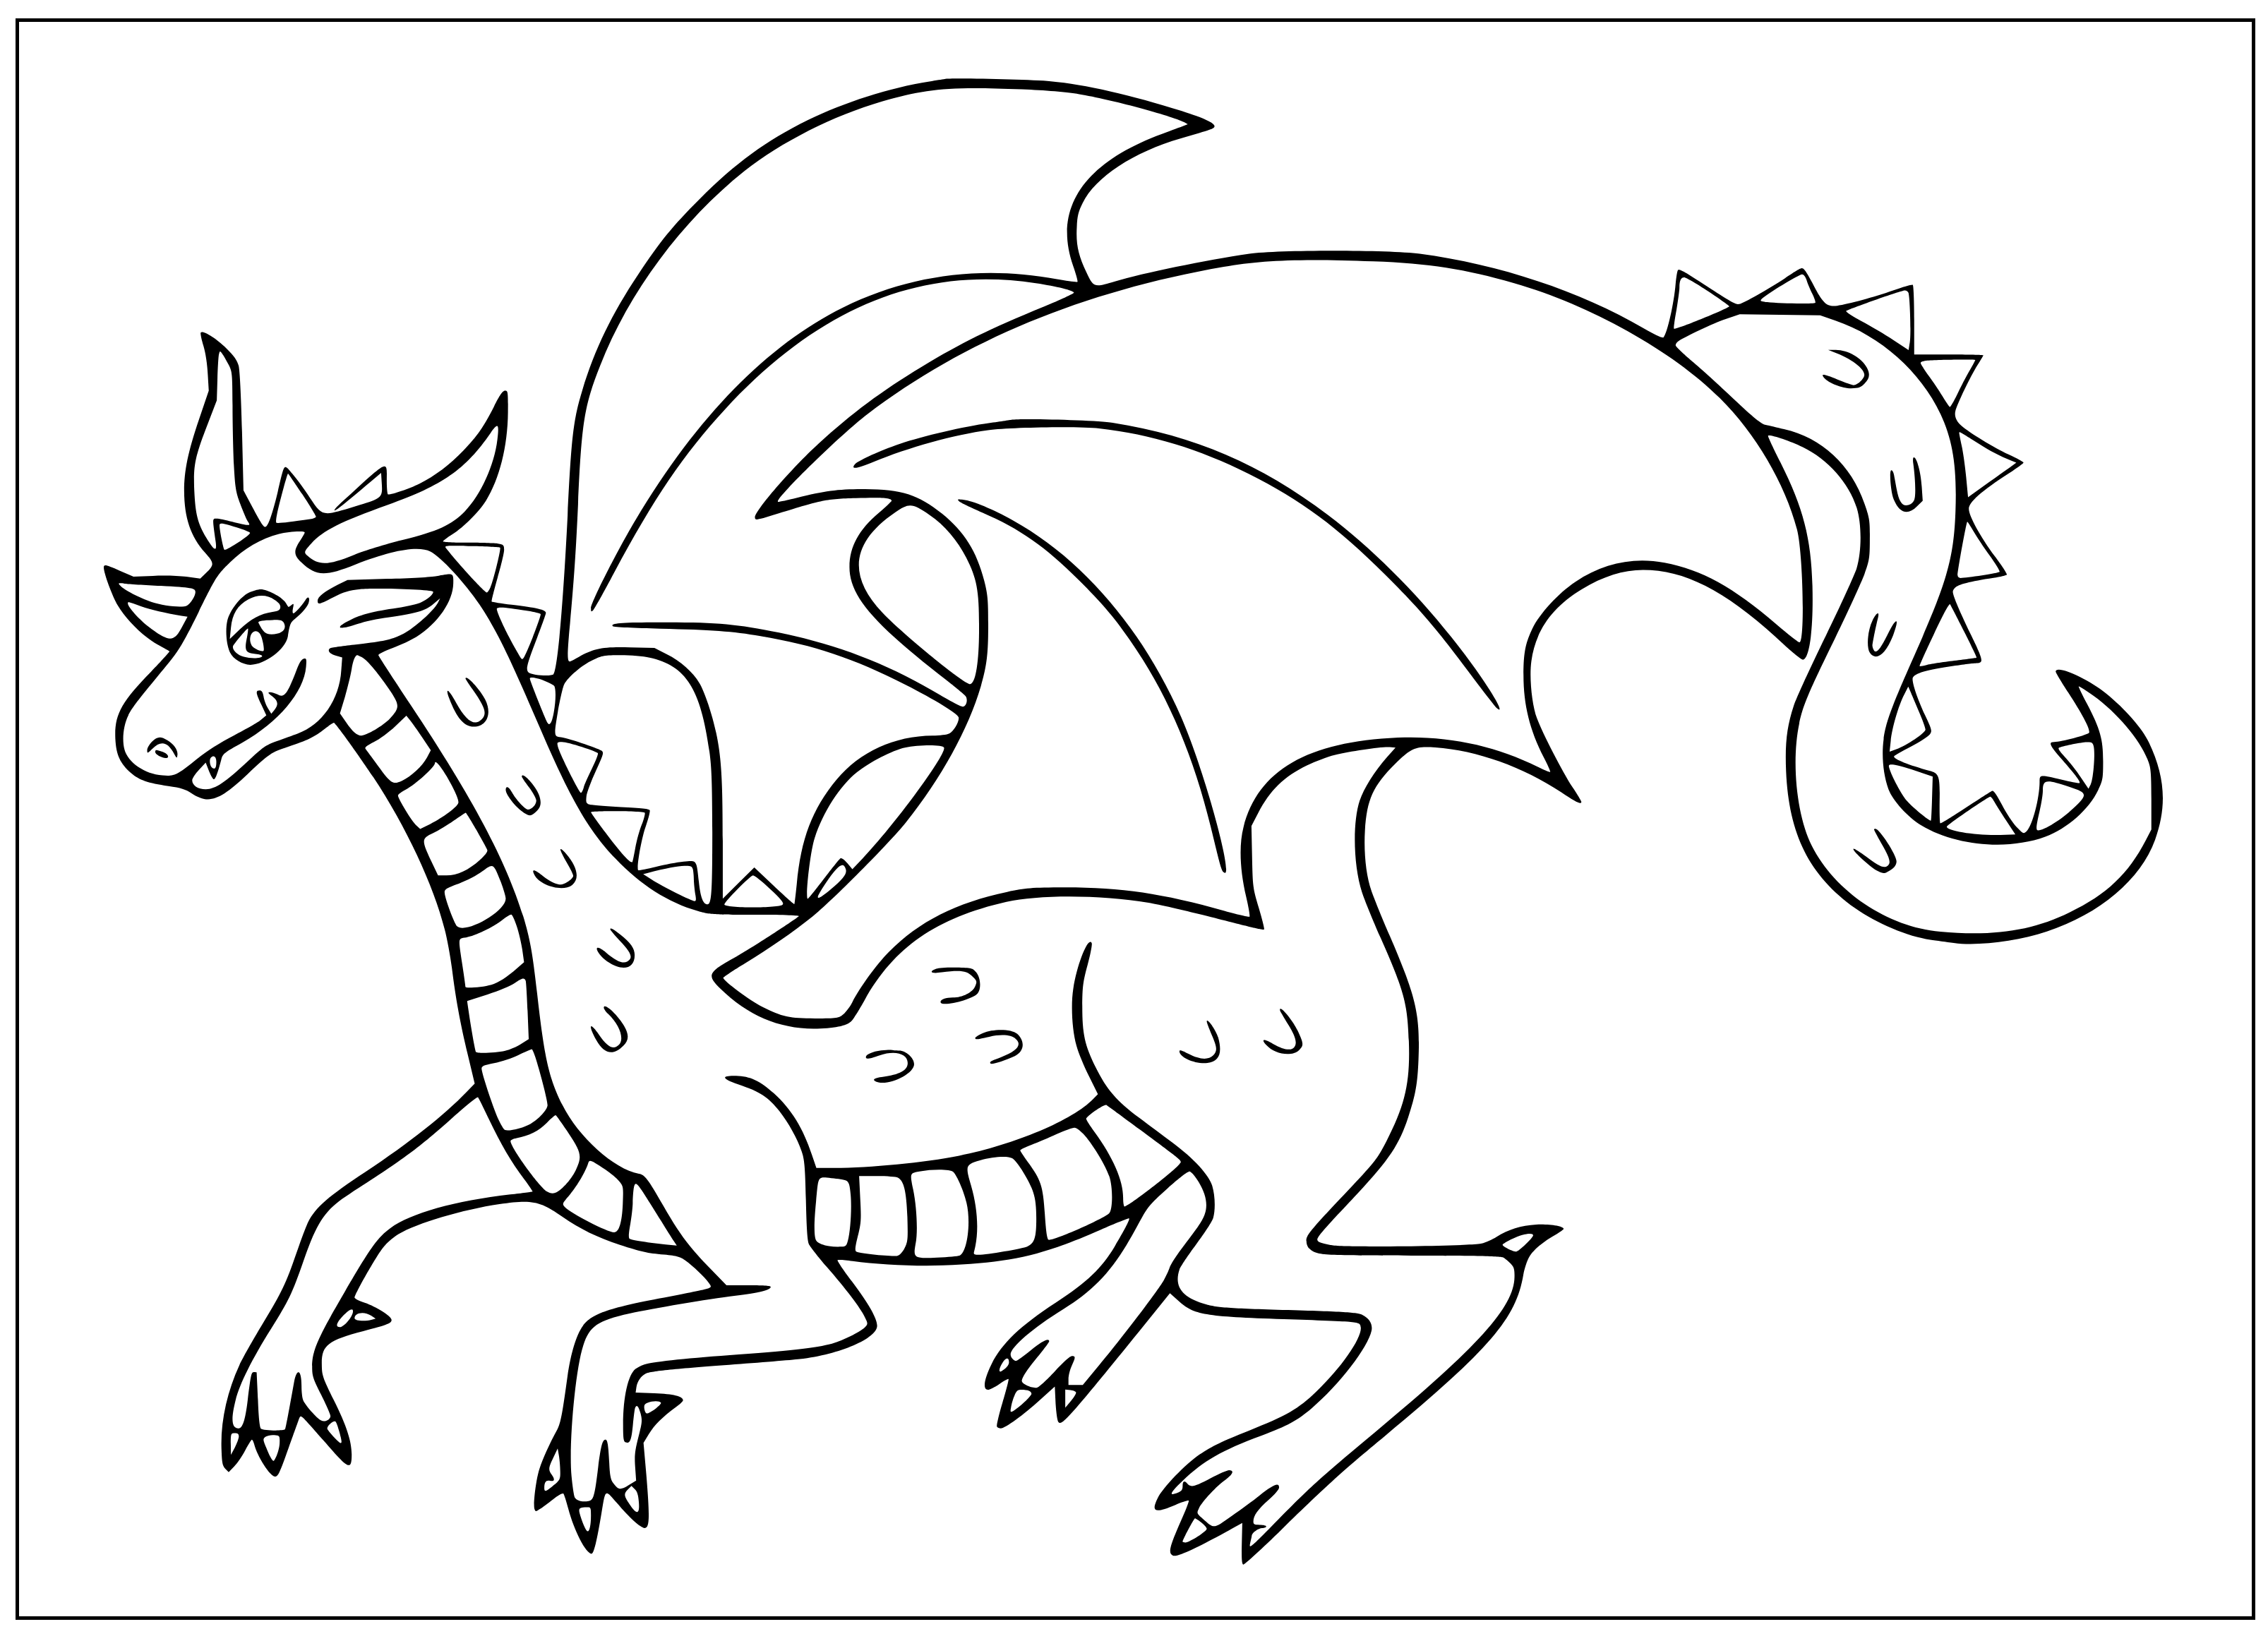 Printable and  Dragon to color Coloring Page for kids.